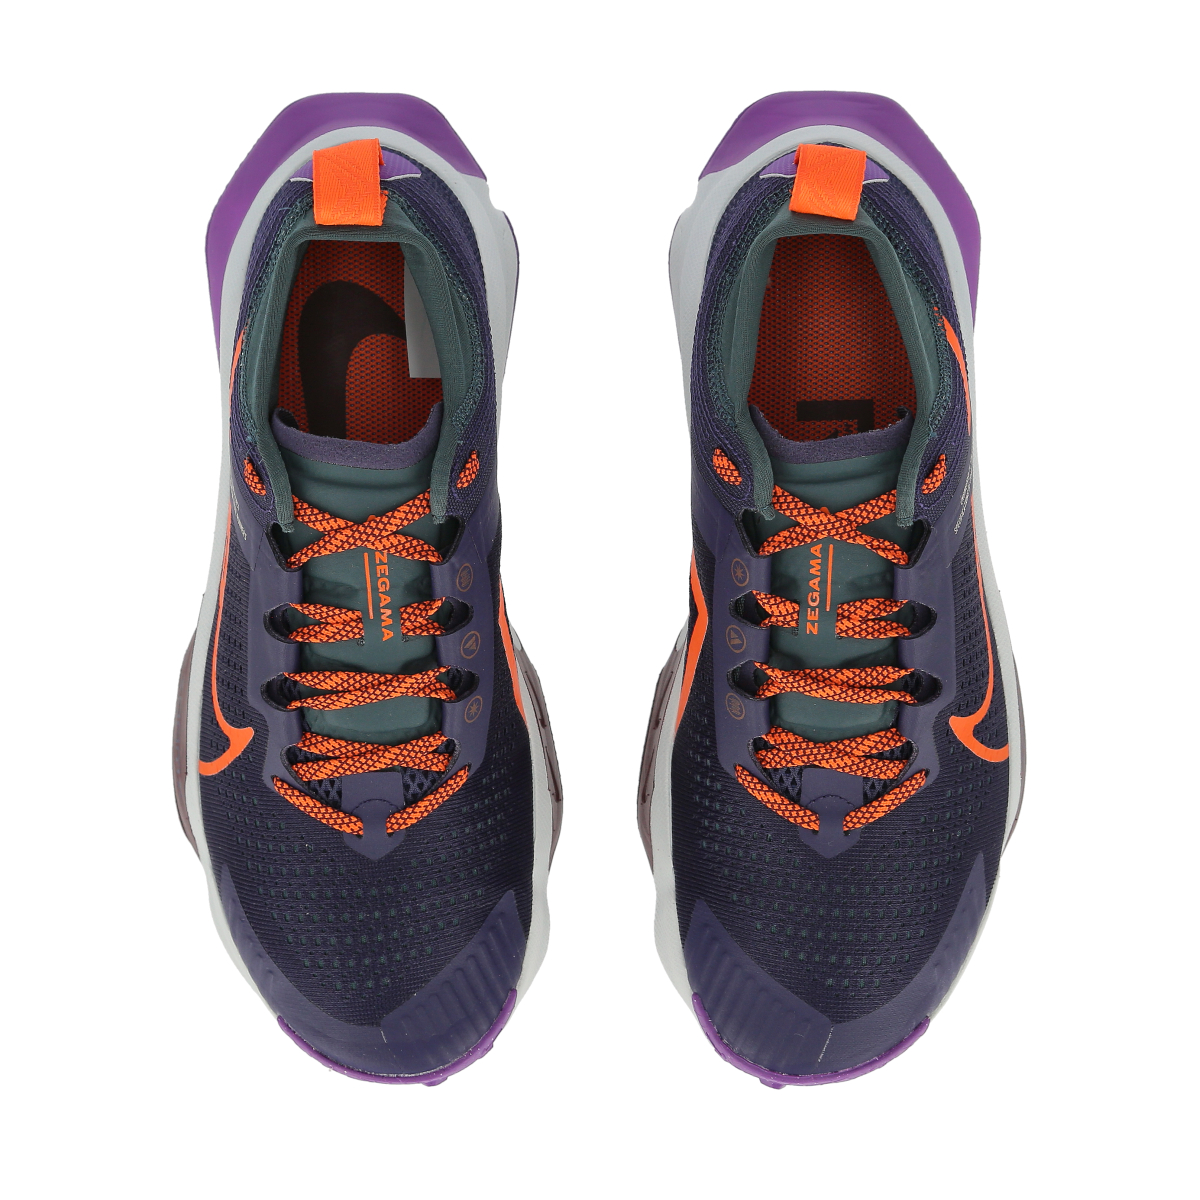 Zapatillas Running Nike Zegama Hombre,  image number null